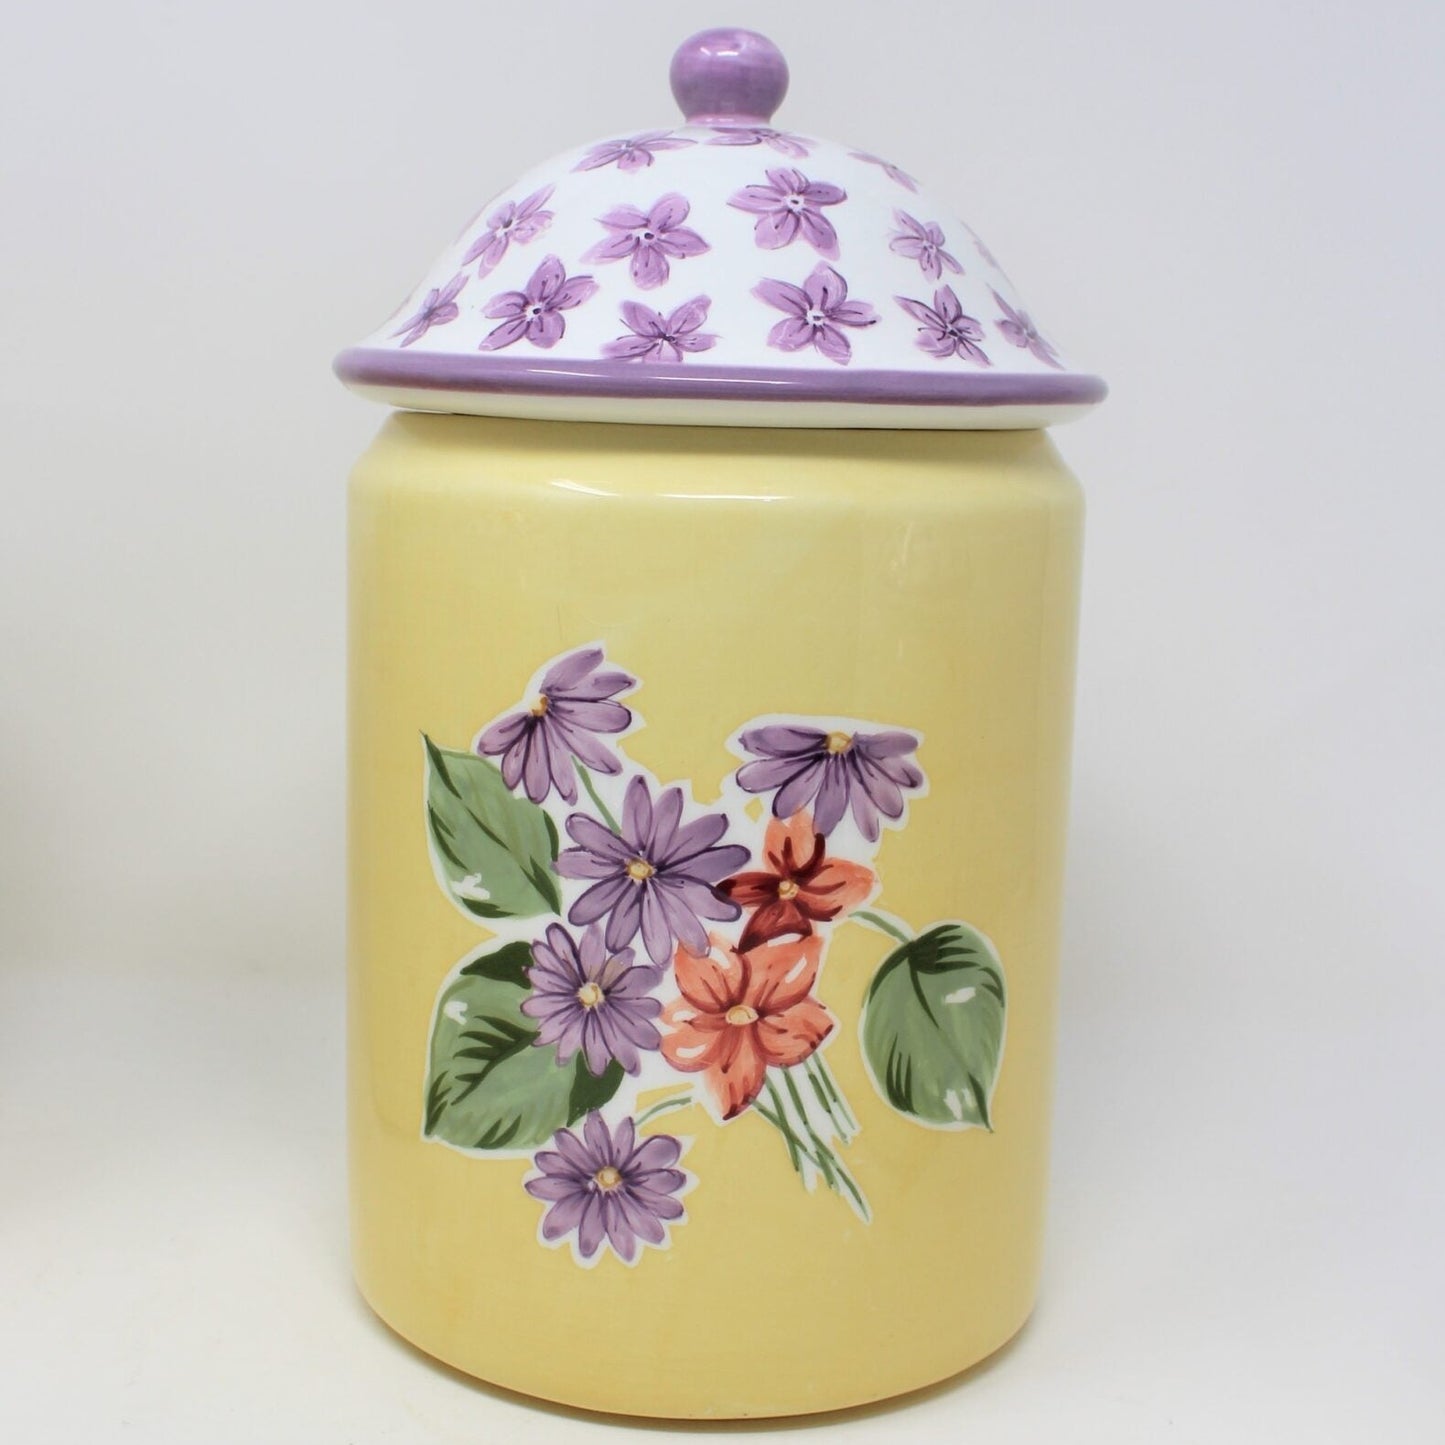 Canister Set, Waverly, Garden Room Cottage Collection "Field of Flowers", Set of 4, Vintage Ceramic